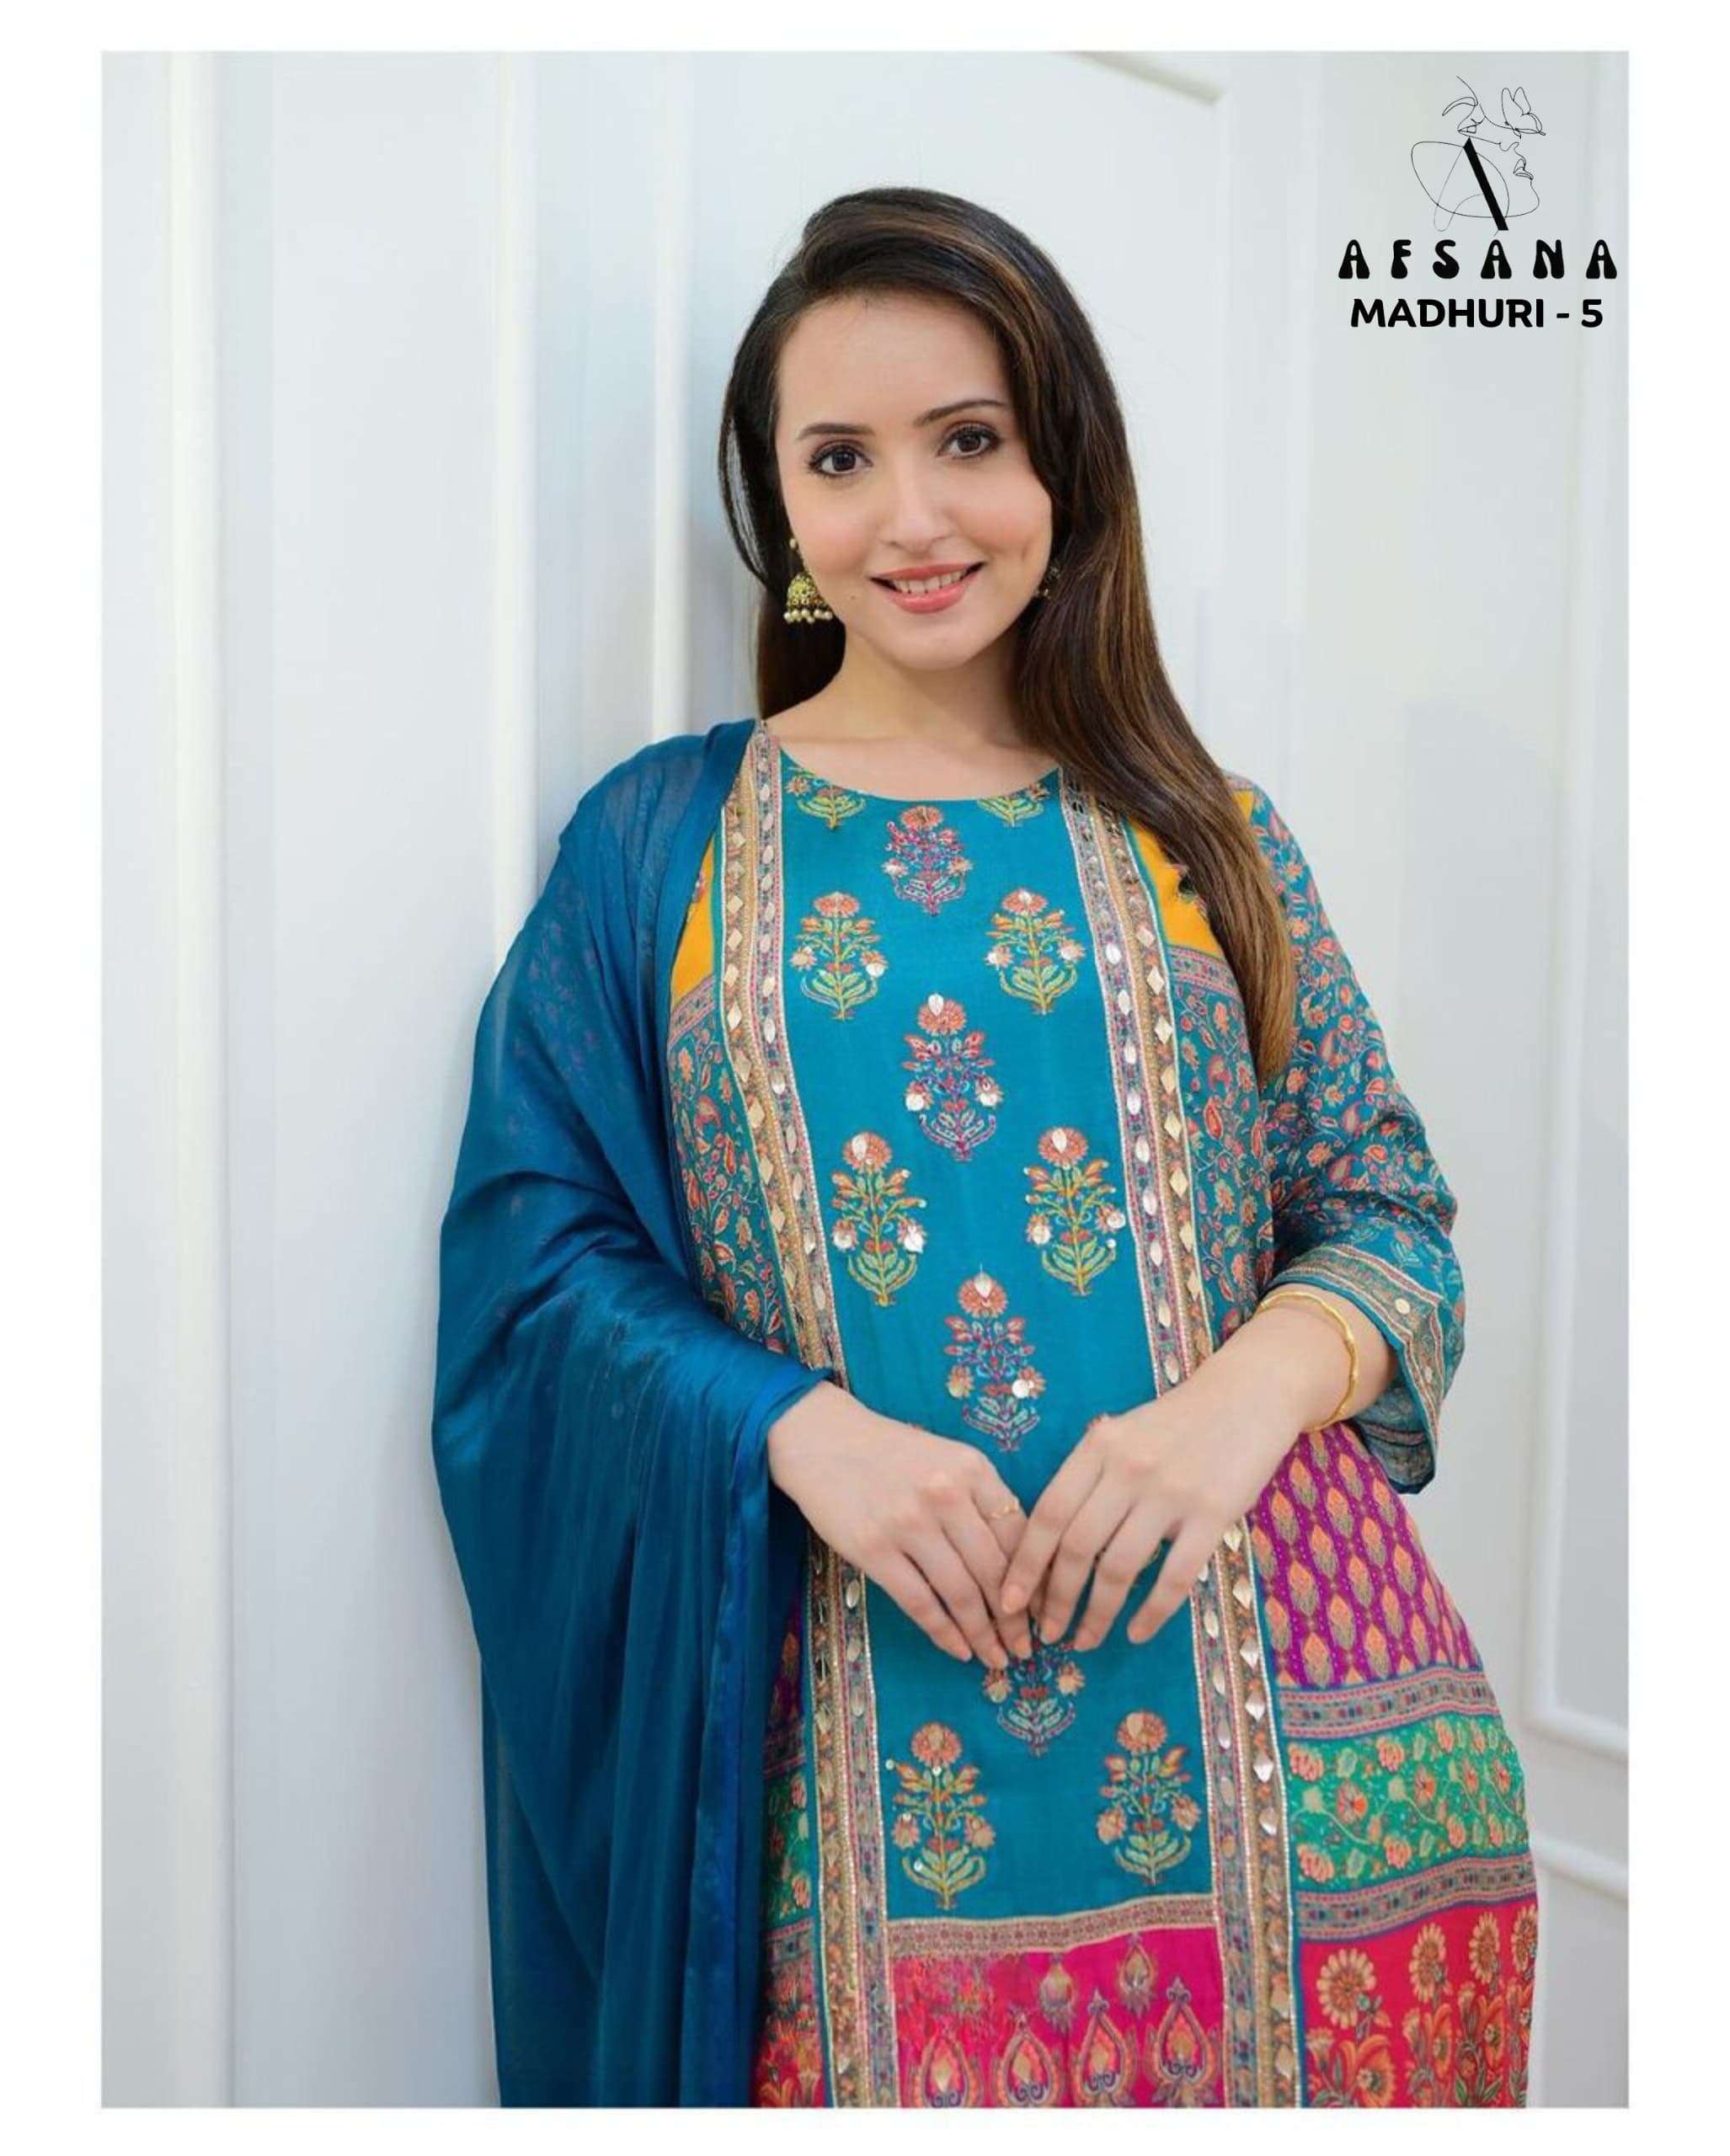 Afsana Madhuri Vol 5 Exclusive Pakistani Readymade Suit New collection